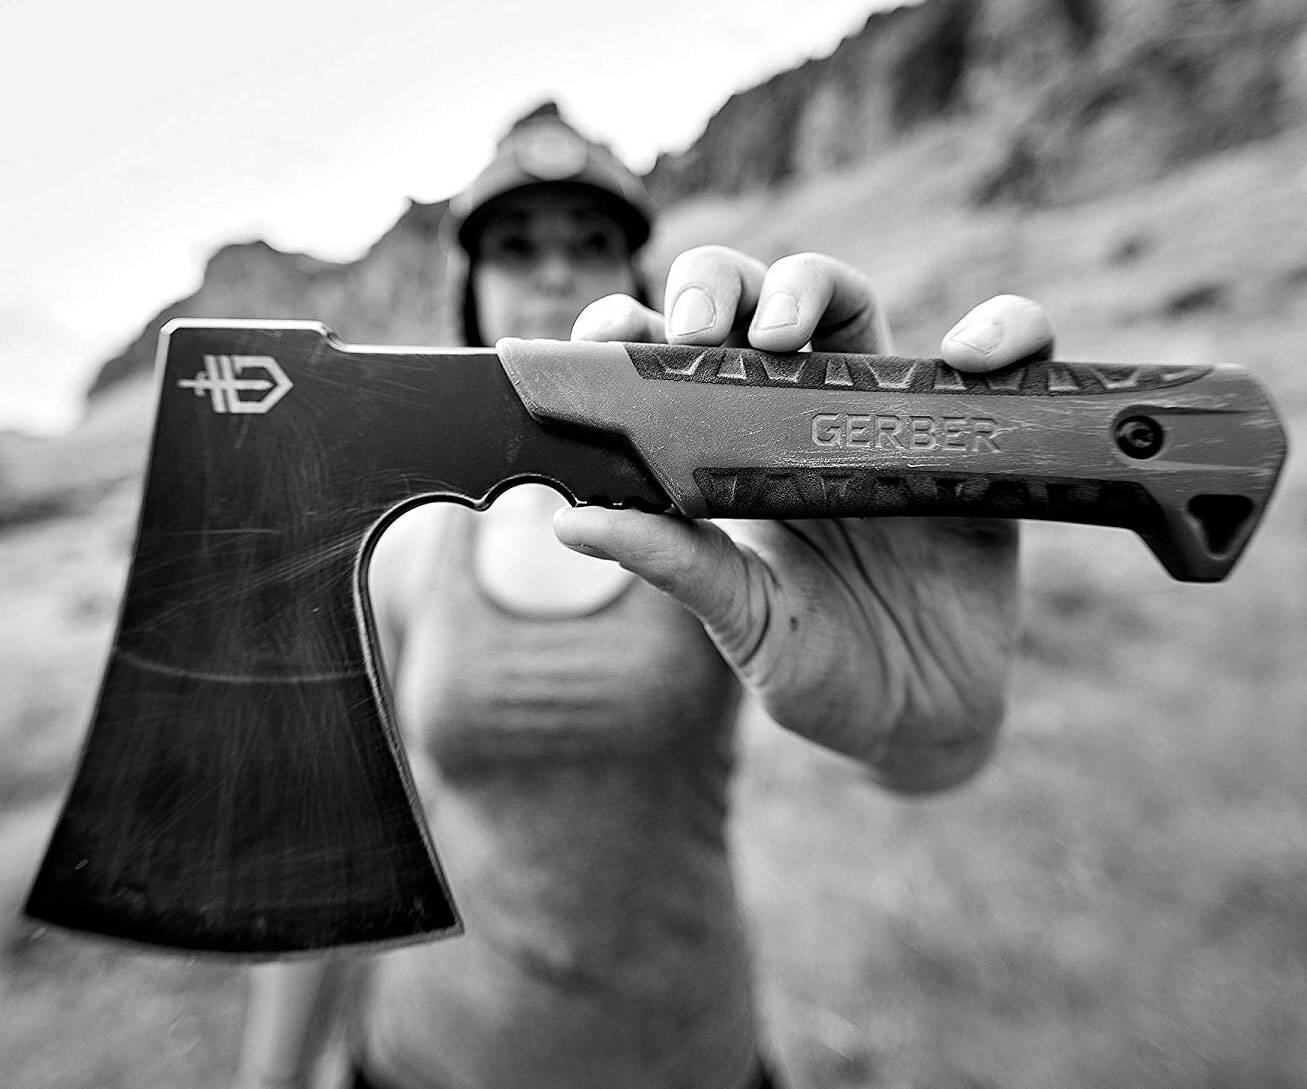 Gerber Pack Hatchet Camping Axe - http://coolthings.us